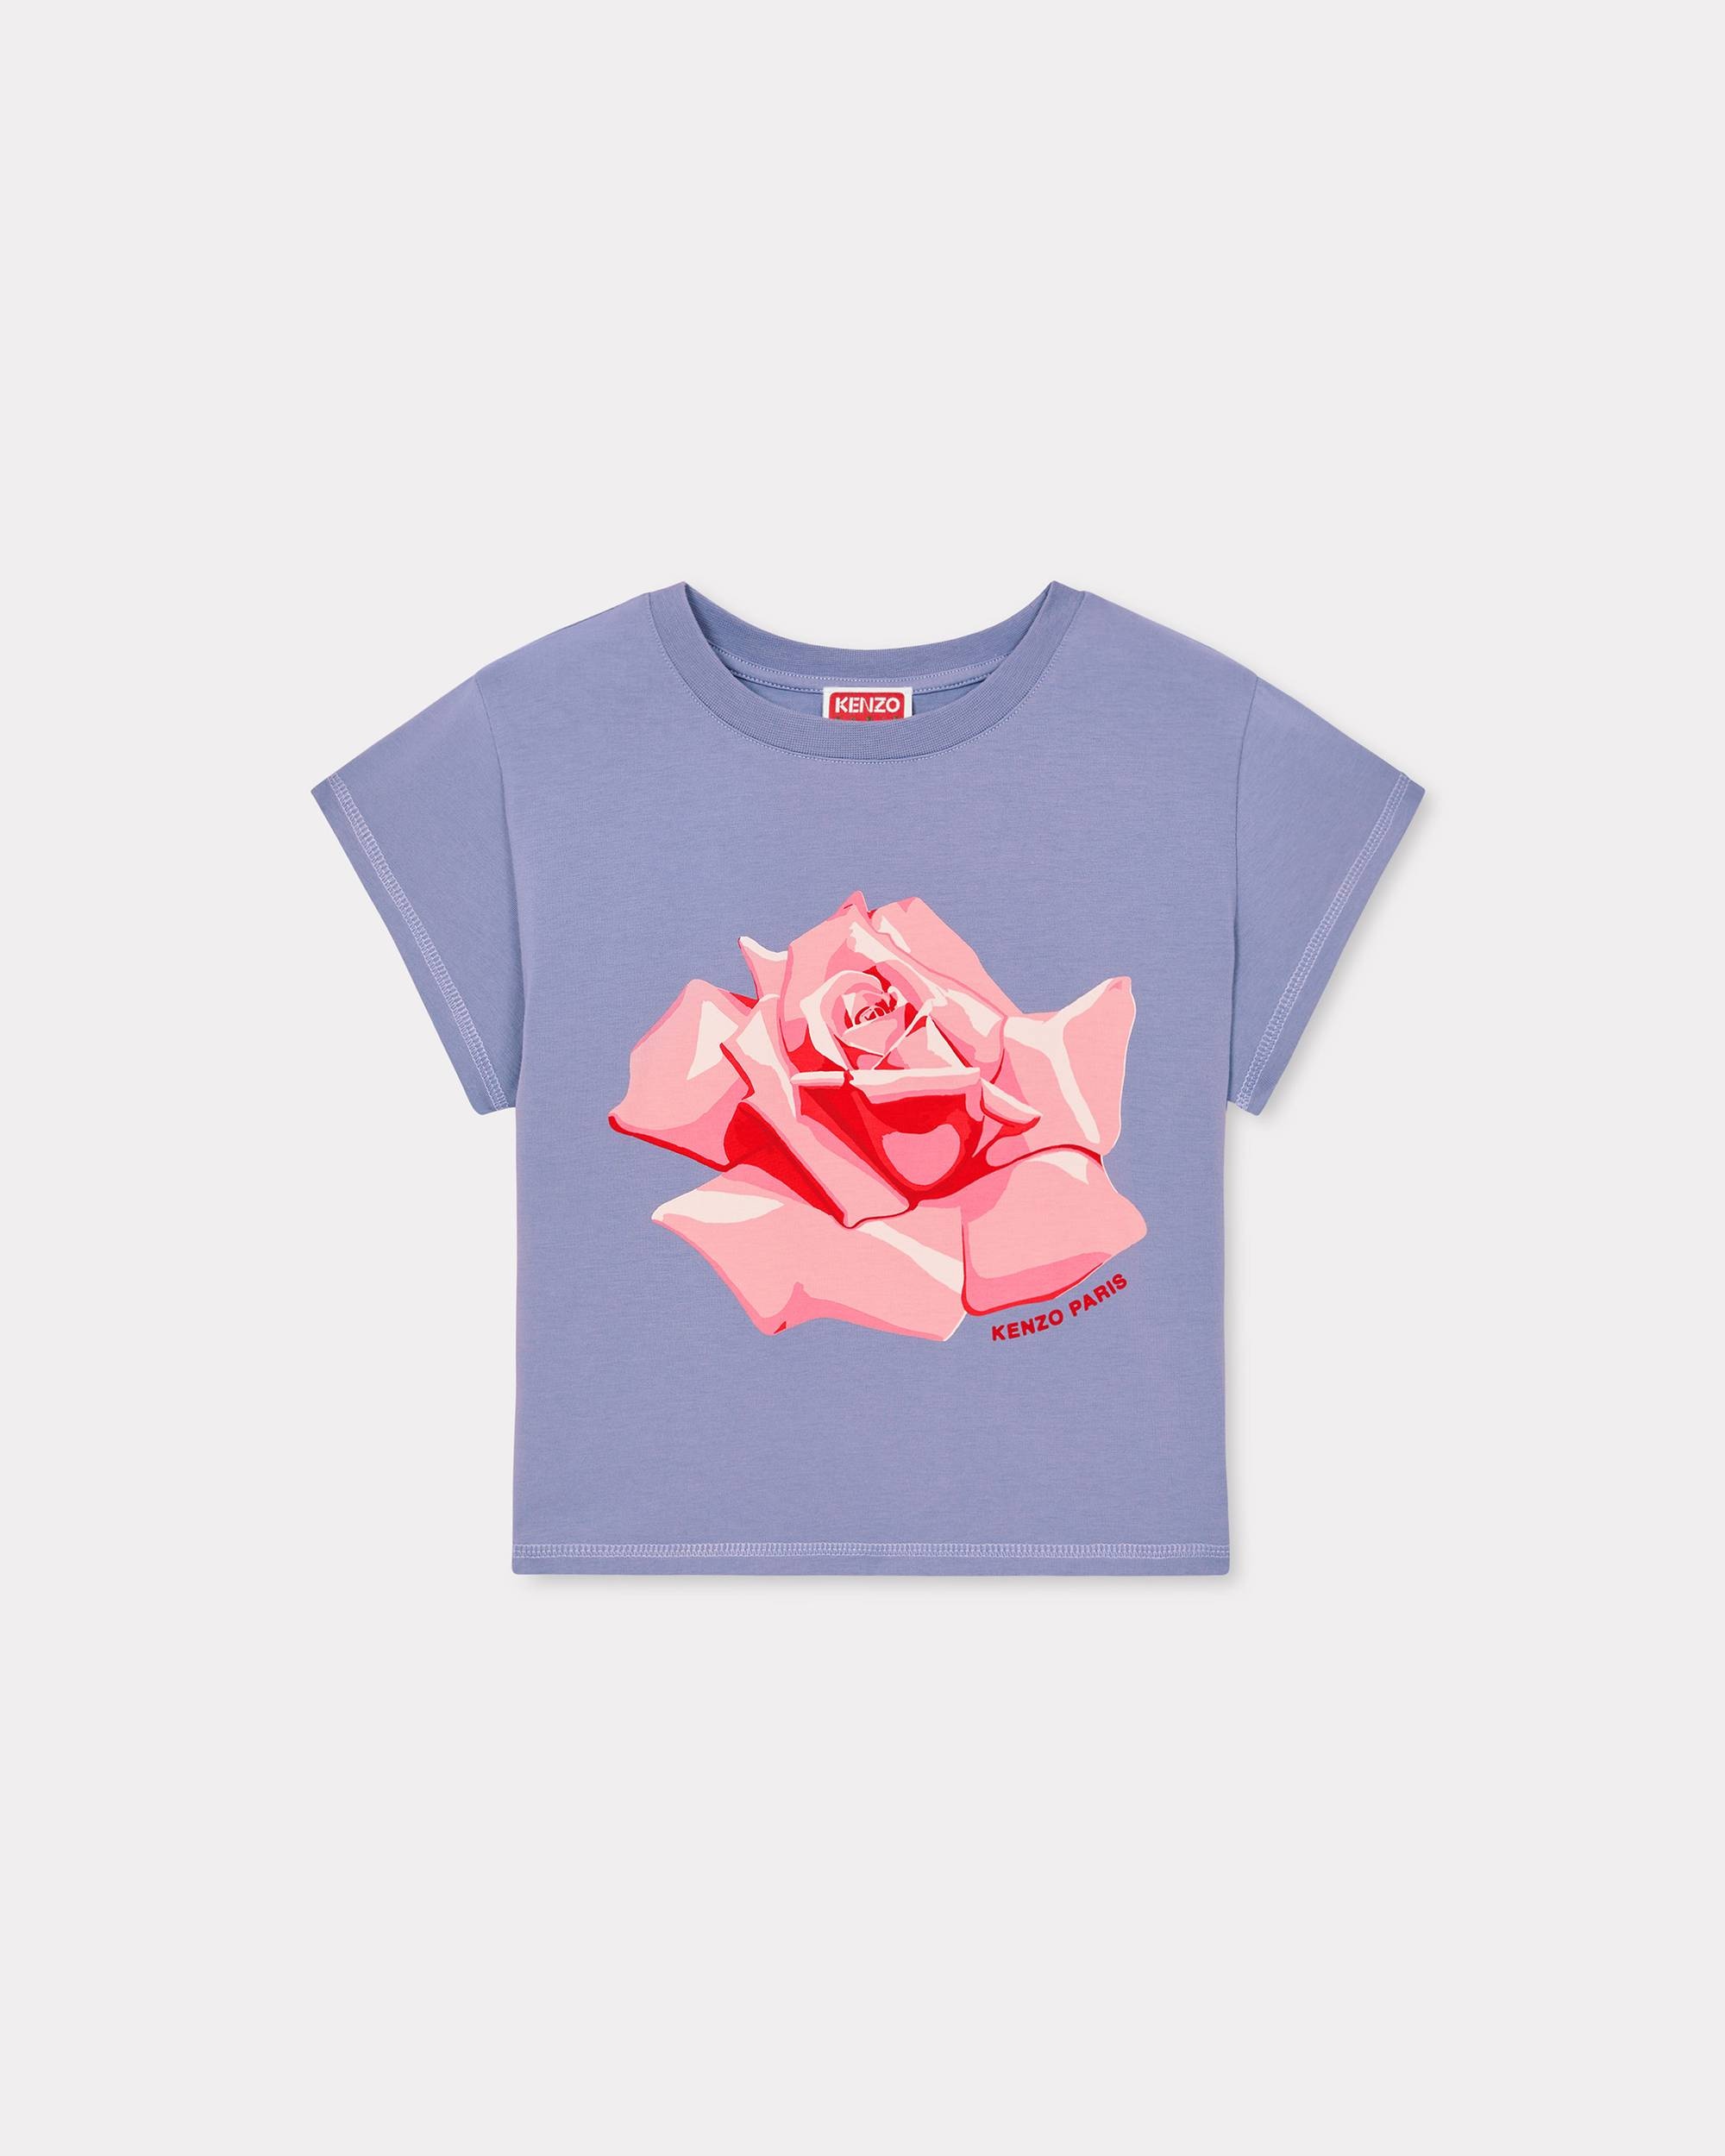 'KENZO Rose' baby fit T-shirt - 1